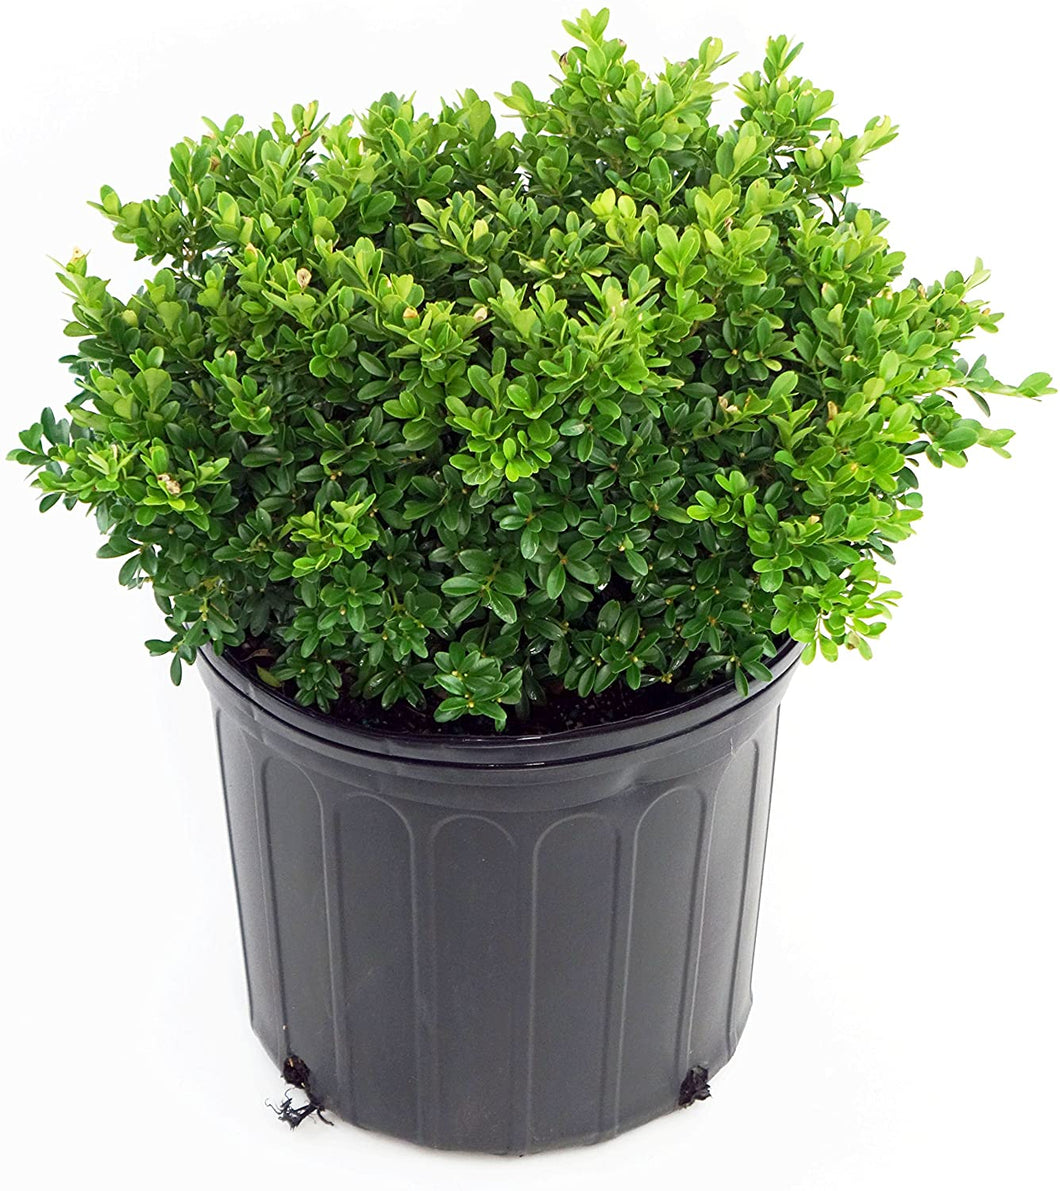 Buxus microphylla 'Tide Hill' (Boxwood) 2 gallon